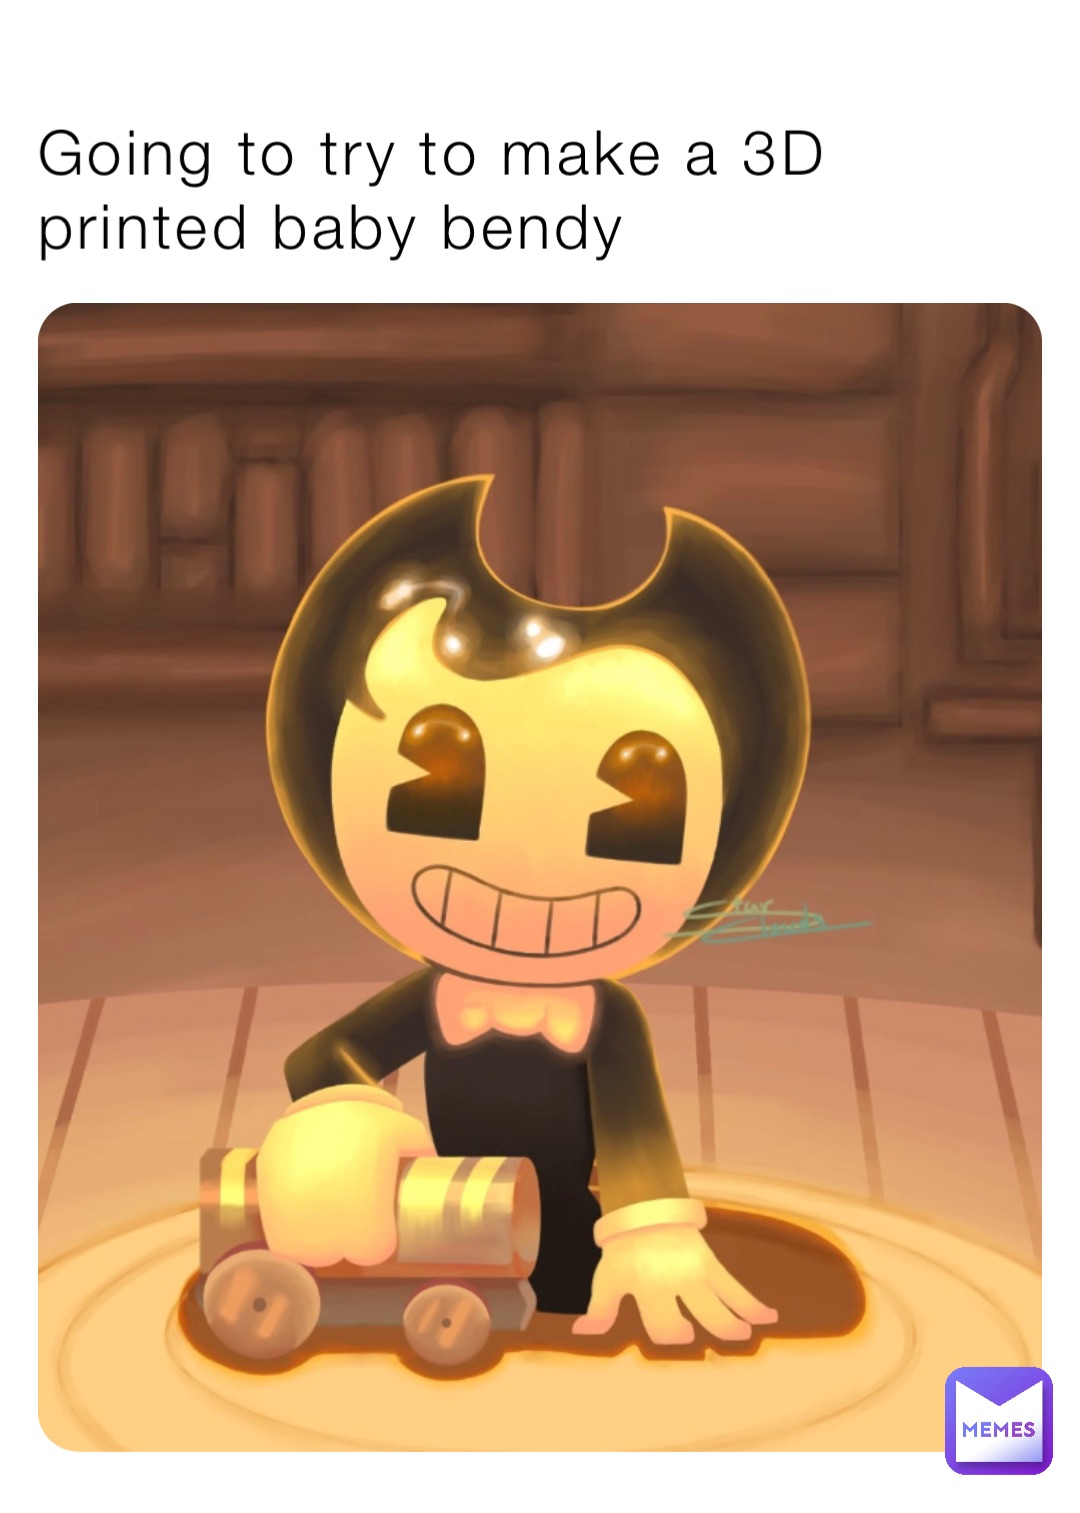 Going to try to make a 3D printed baby bendy